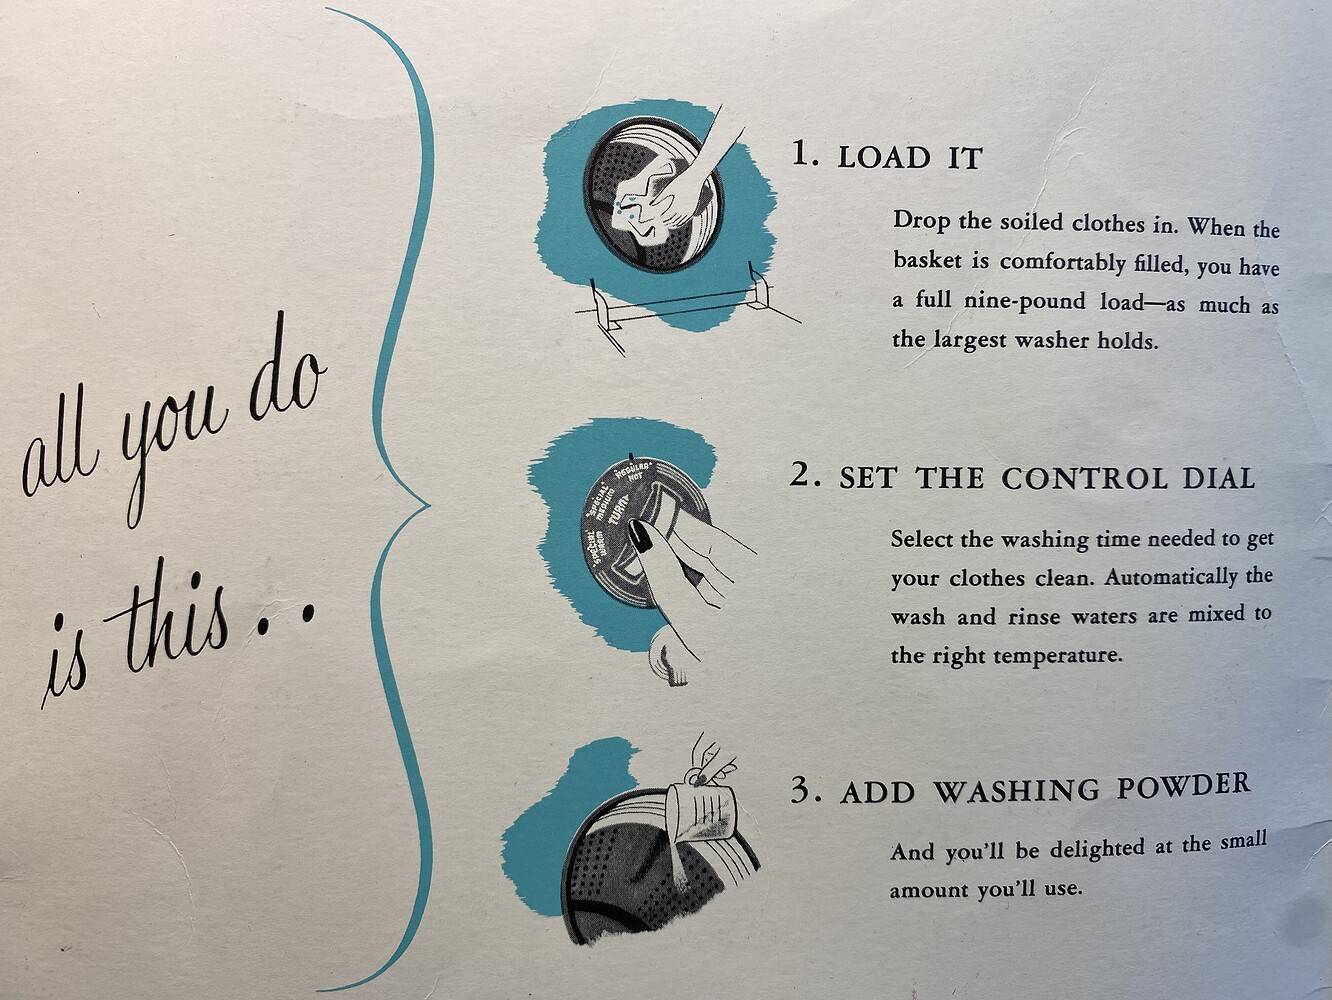 Spot illustrations from a Mid-Century washing machine brochure. They show from top to bottom: a hand loading laundry into a laundry machine, a hand turning the dial of a washing machine, and a hand pouring washing powder into a  laundry machine.